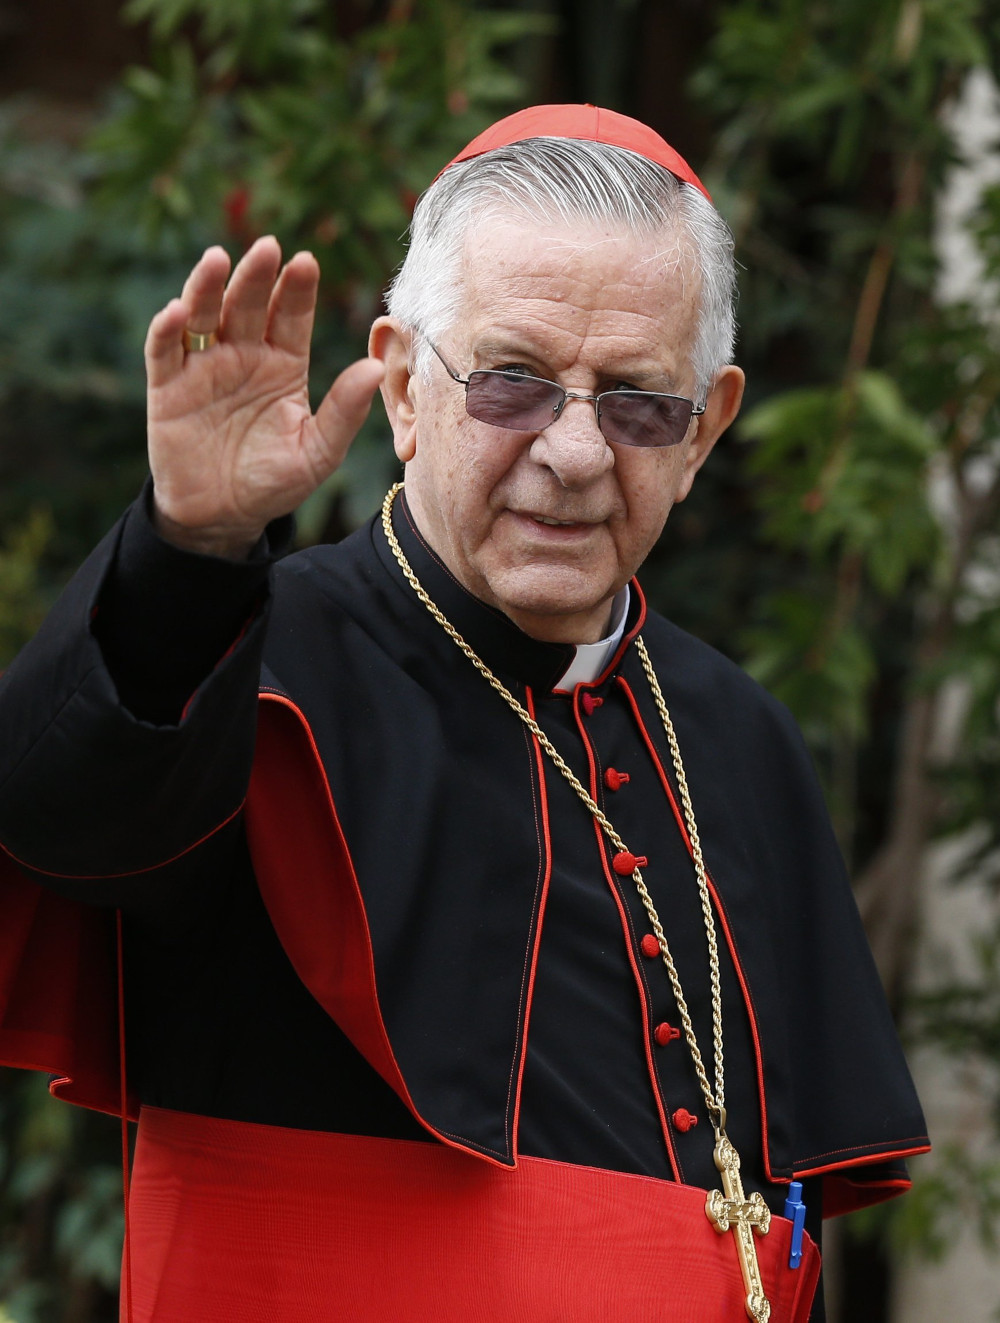 An older white man wearing cardinal's clothes and glasses transitioned to sunglasses raises his hand to wave.